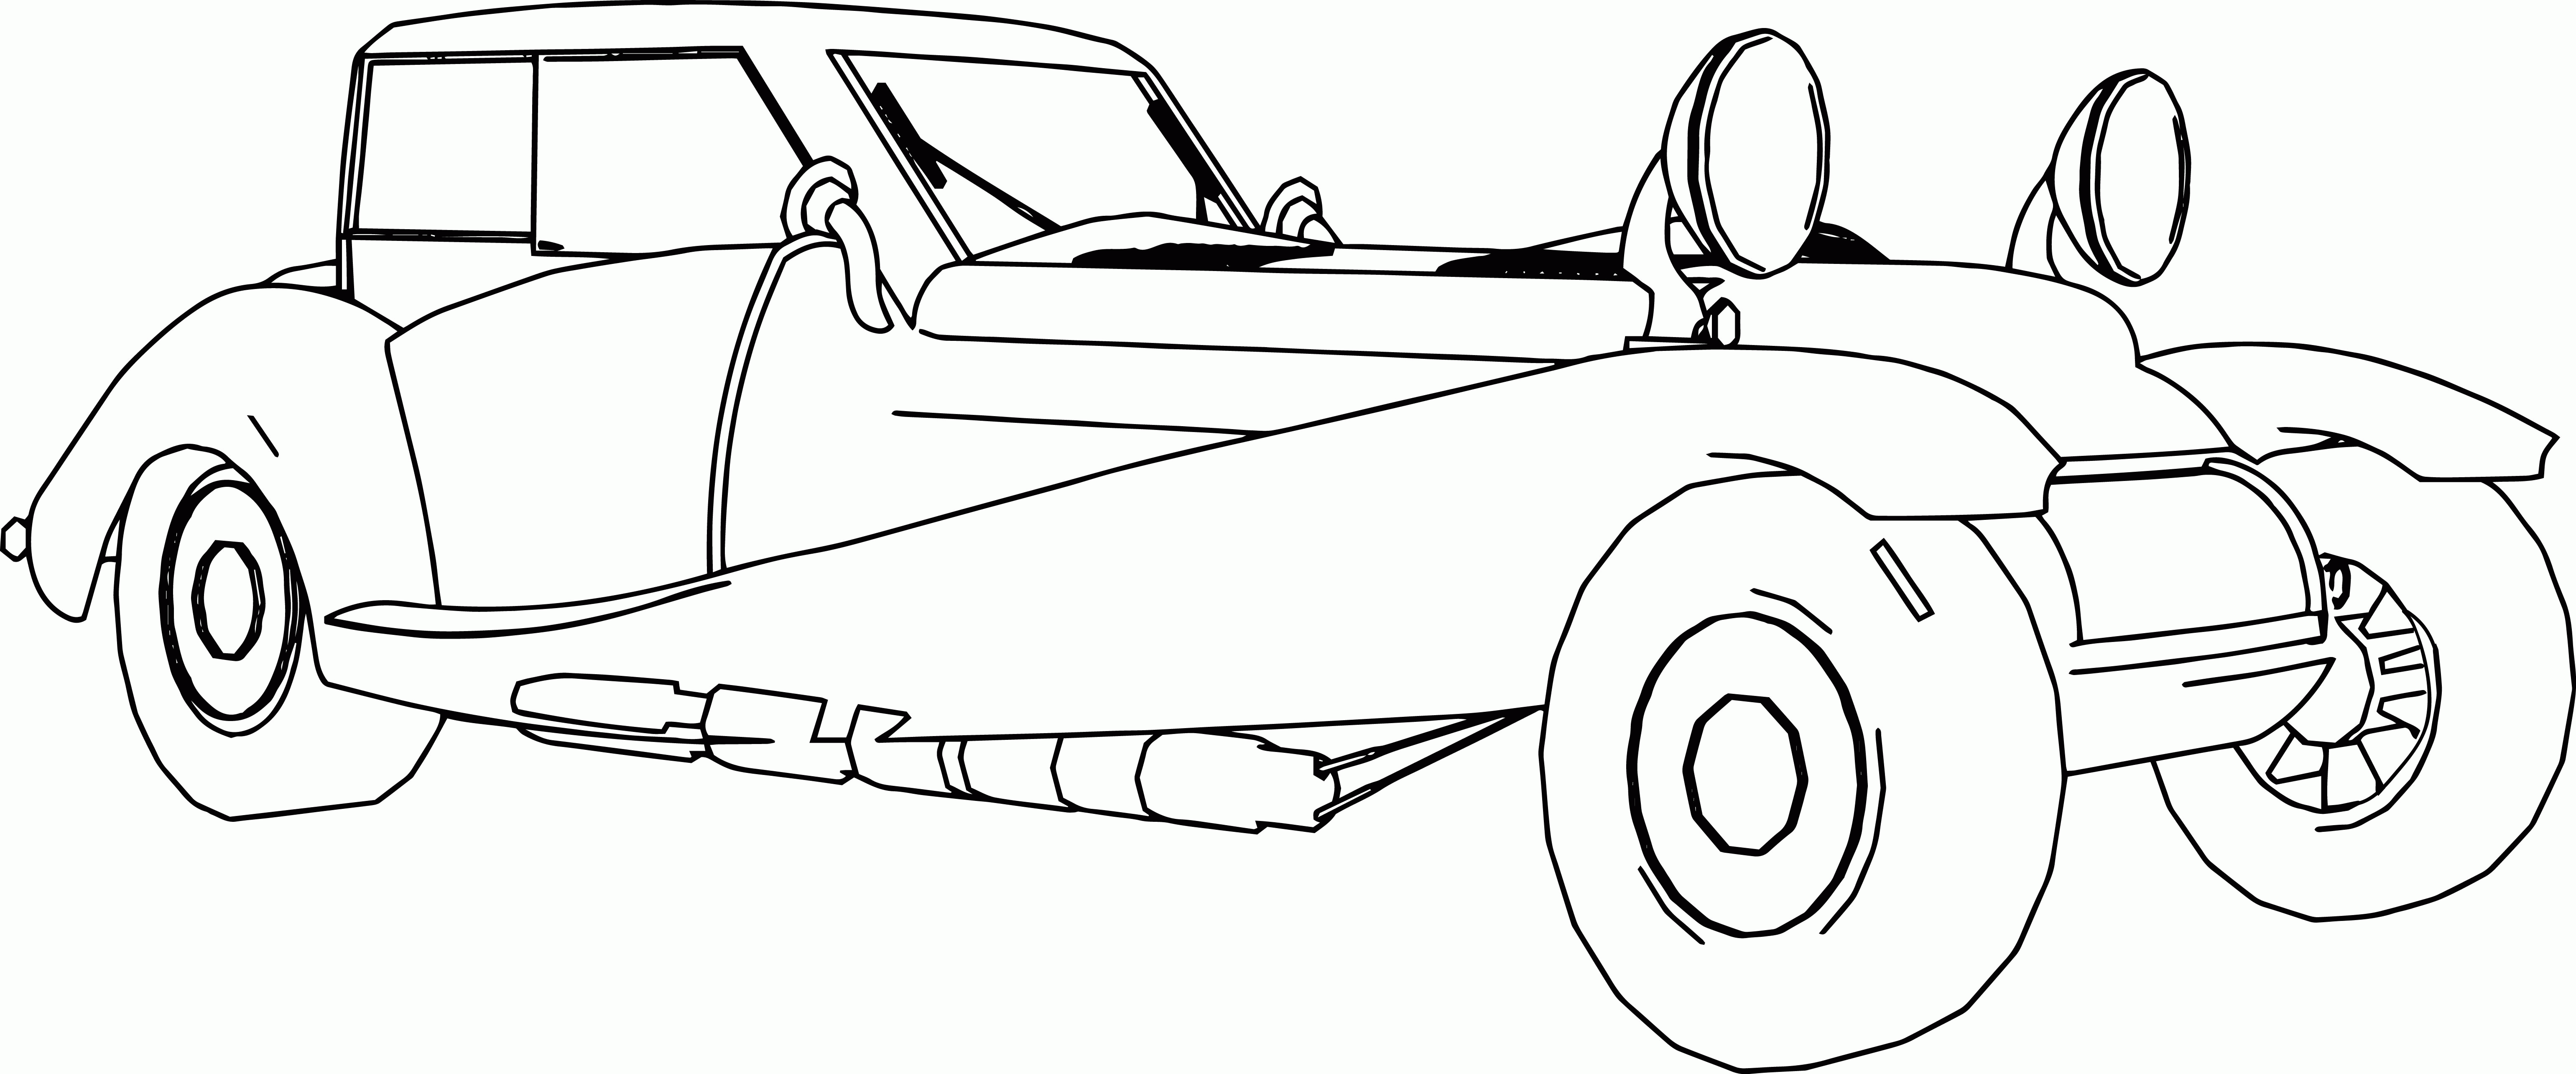 Go Kart Coloring Pages - Coloring Home